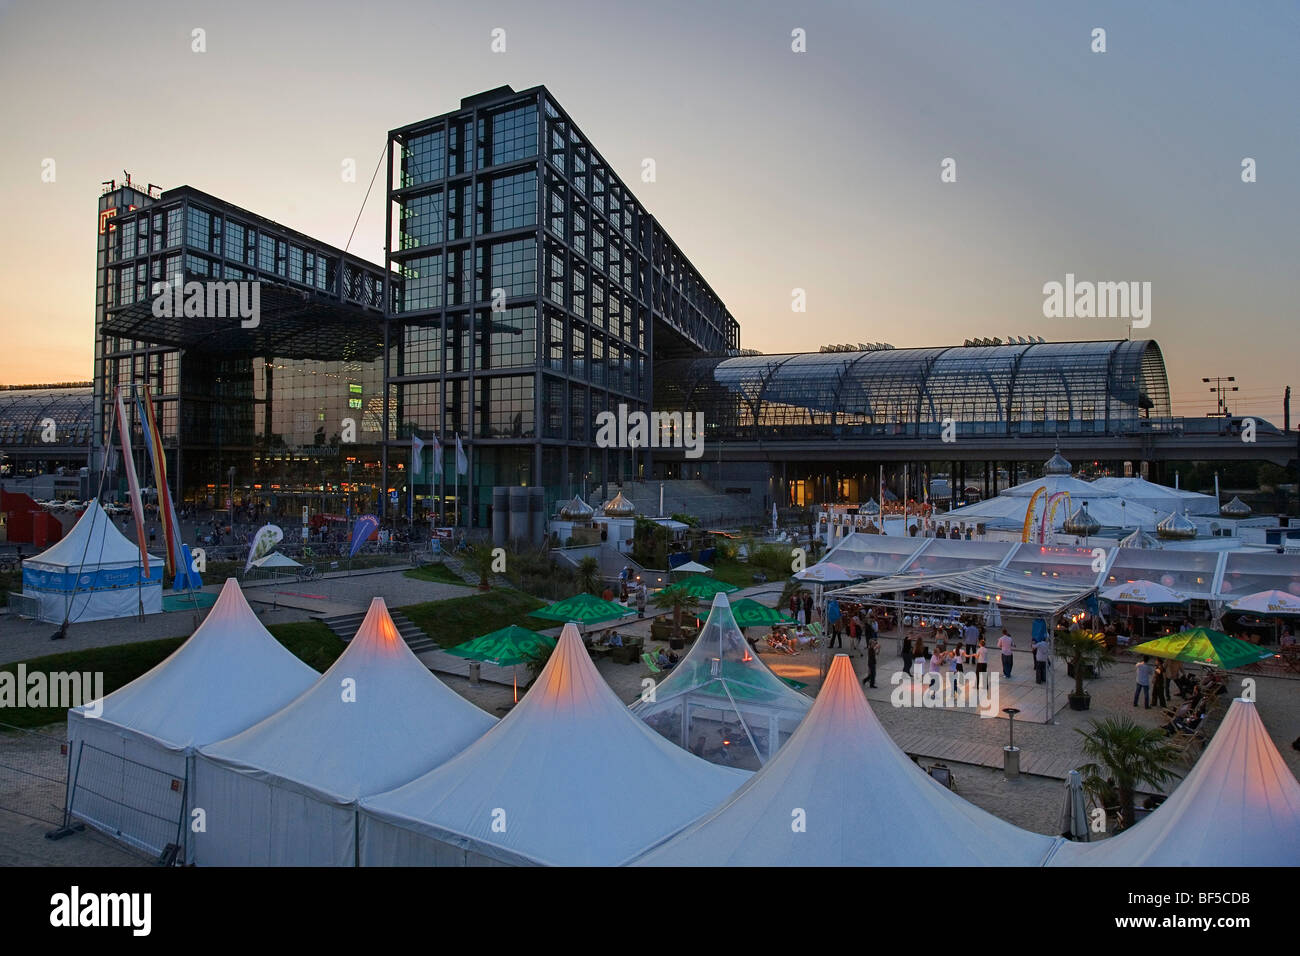 Berlin Hauptbahnhof, central railway station, with event tents in the foreground on an early summer evening, Mitte, Berlin, Ger Stock Photo